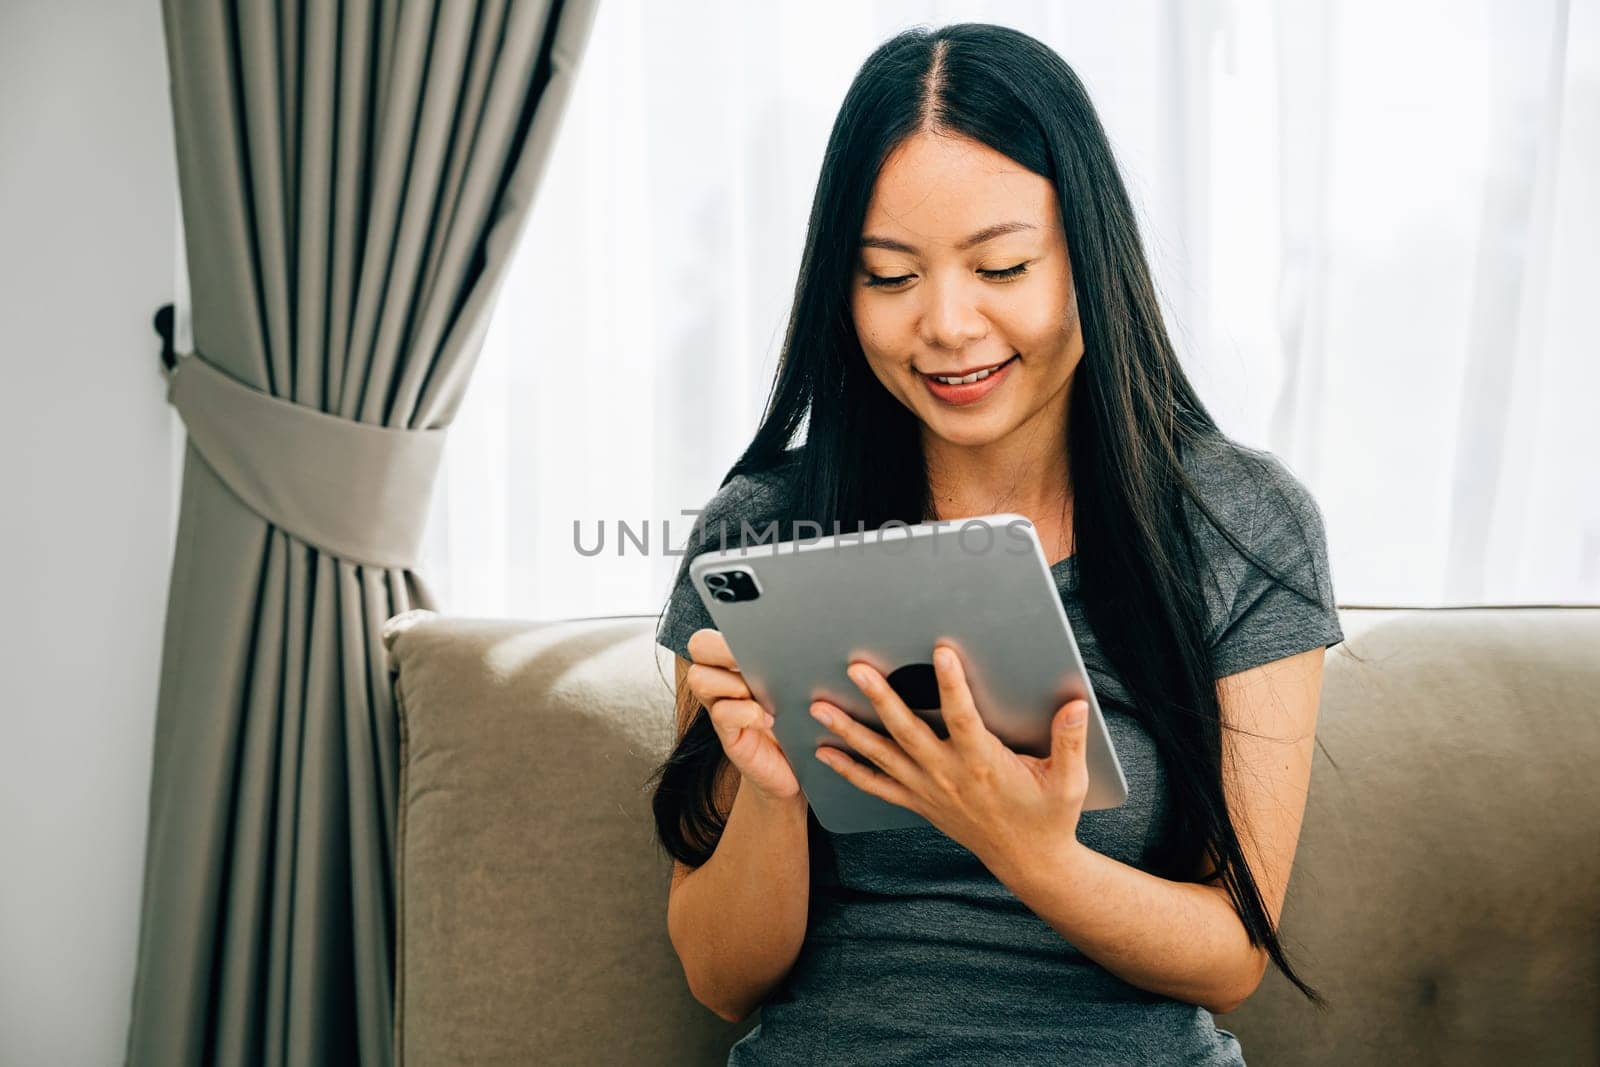 Amidst a comfortable home atmosphere a blissful young Asian woman enjoys leisure time engaged in online shopping through a digital tablet on the sofa exuding relaxation and happiness.